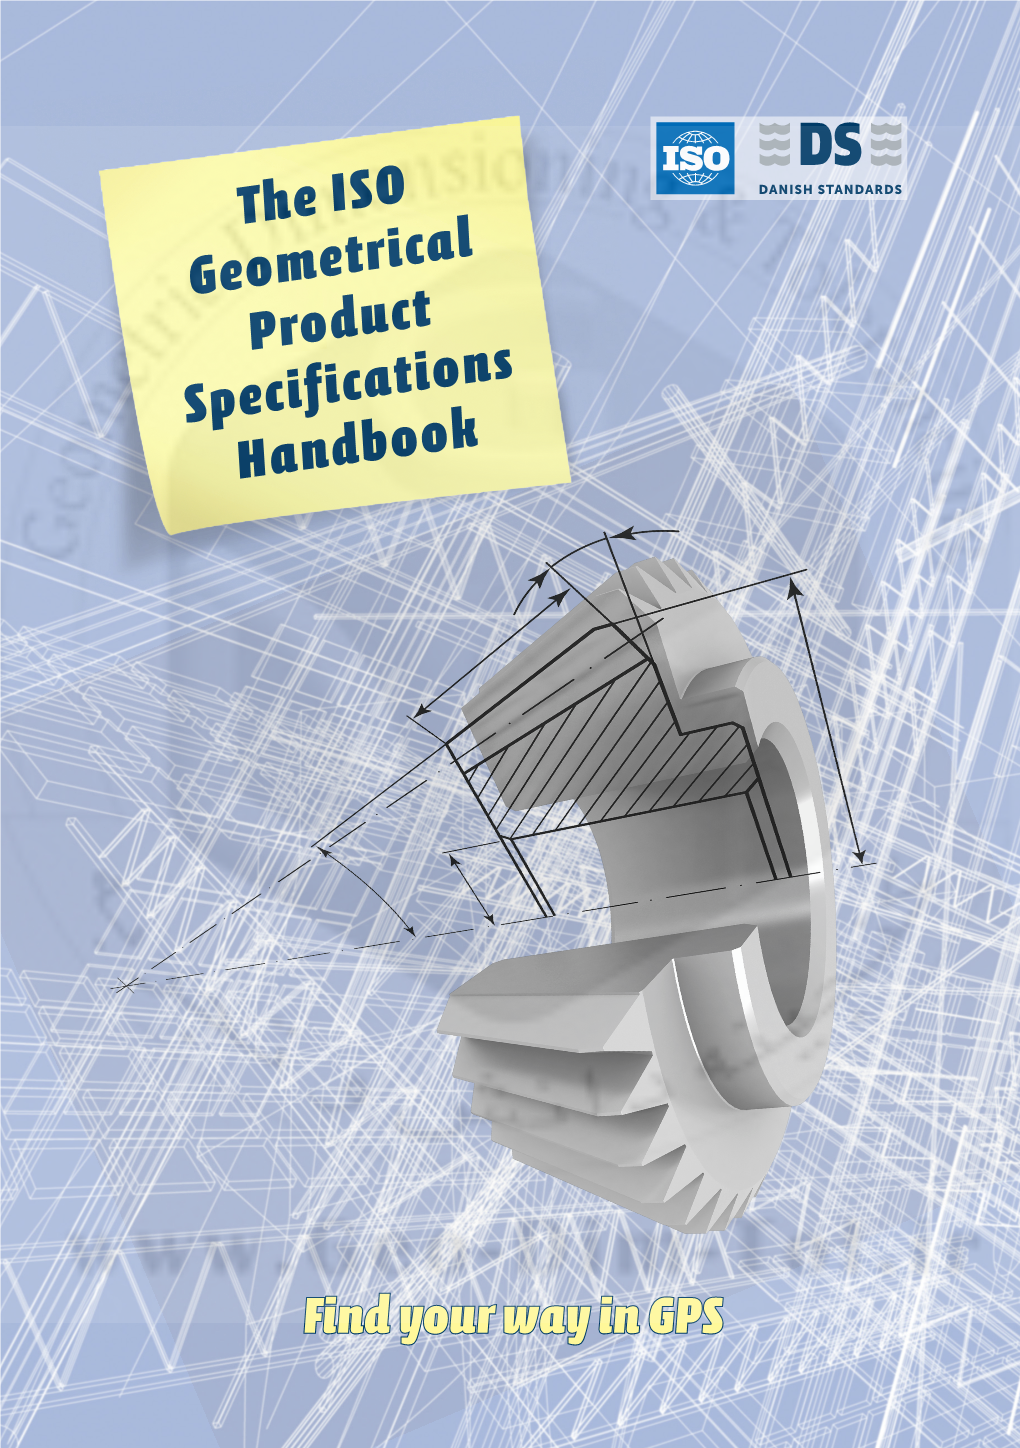 The ISO Geometrical Product Specifications Handbook